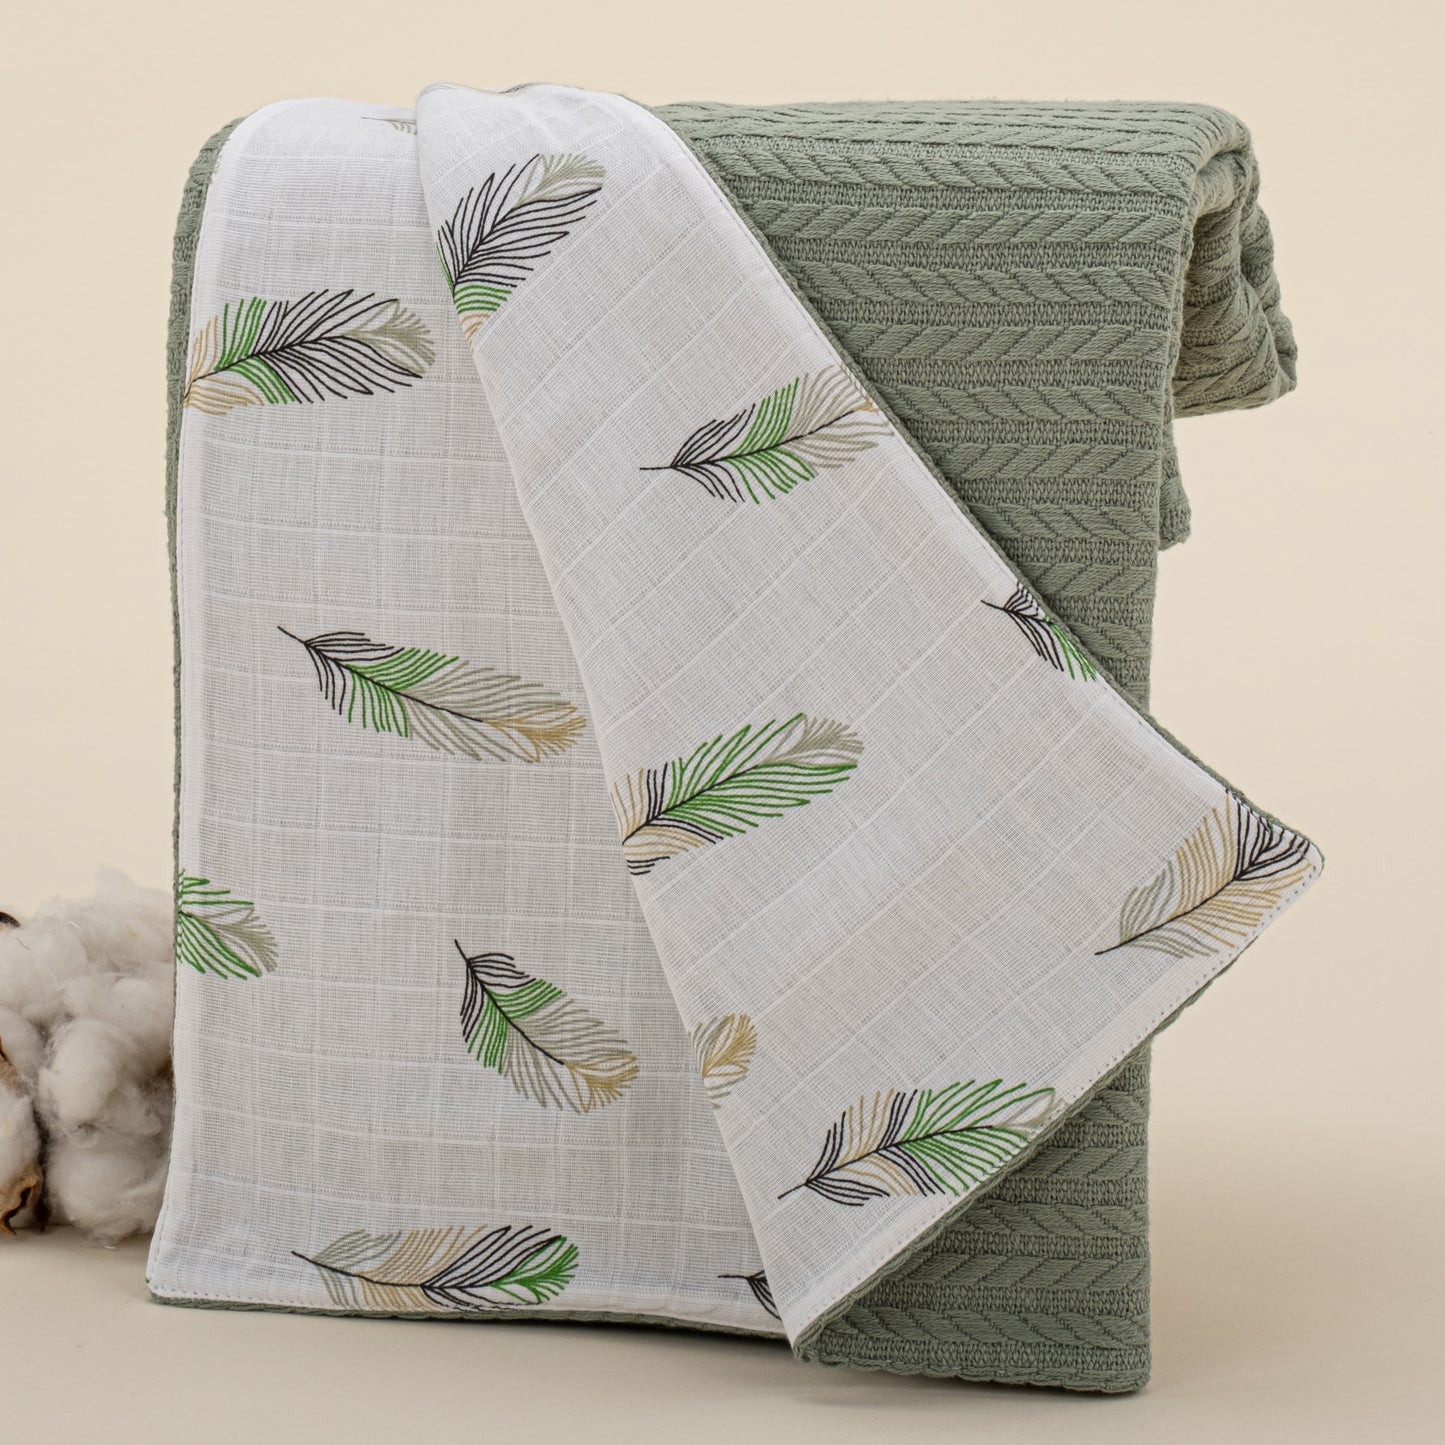 Pique Blanket - Double Side - Green Braid - Green Feather